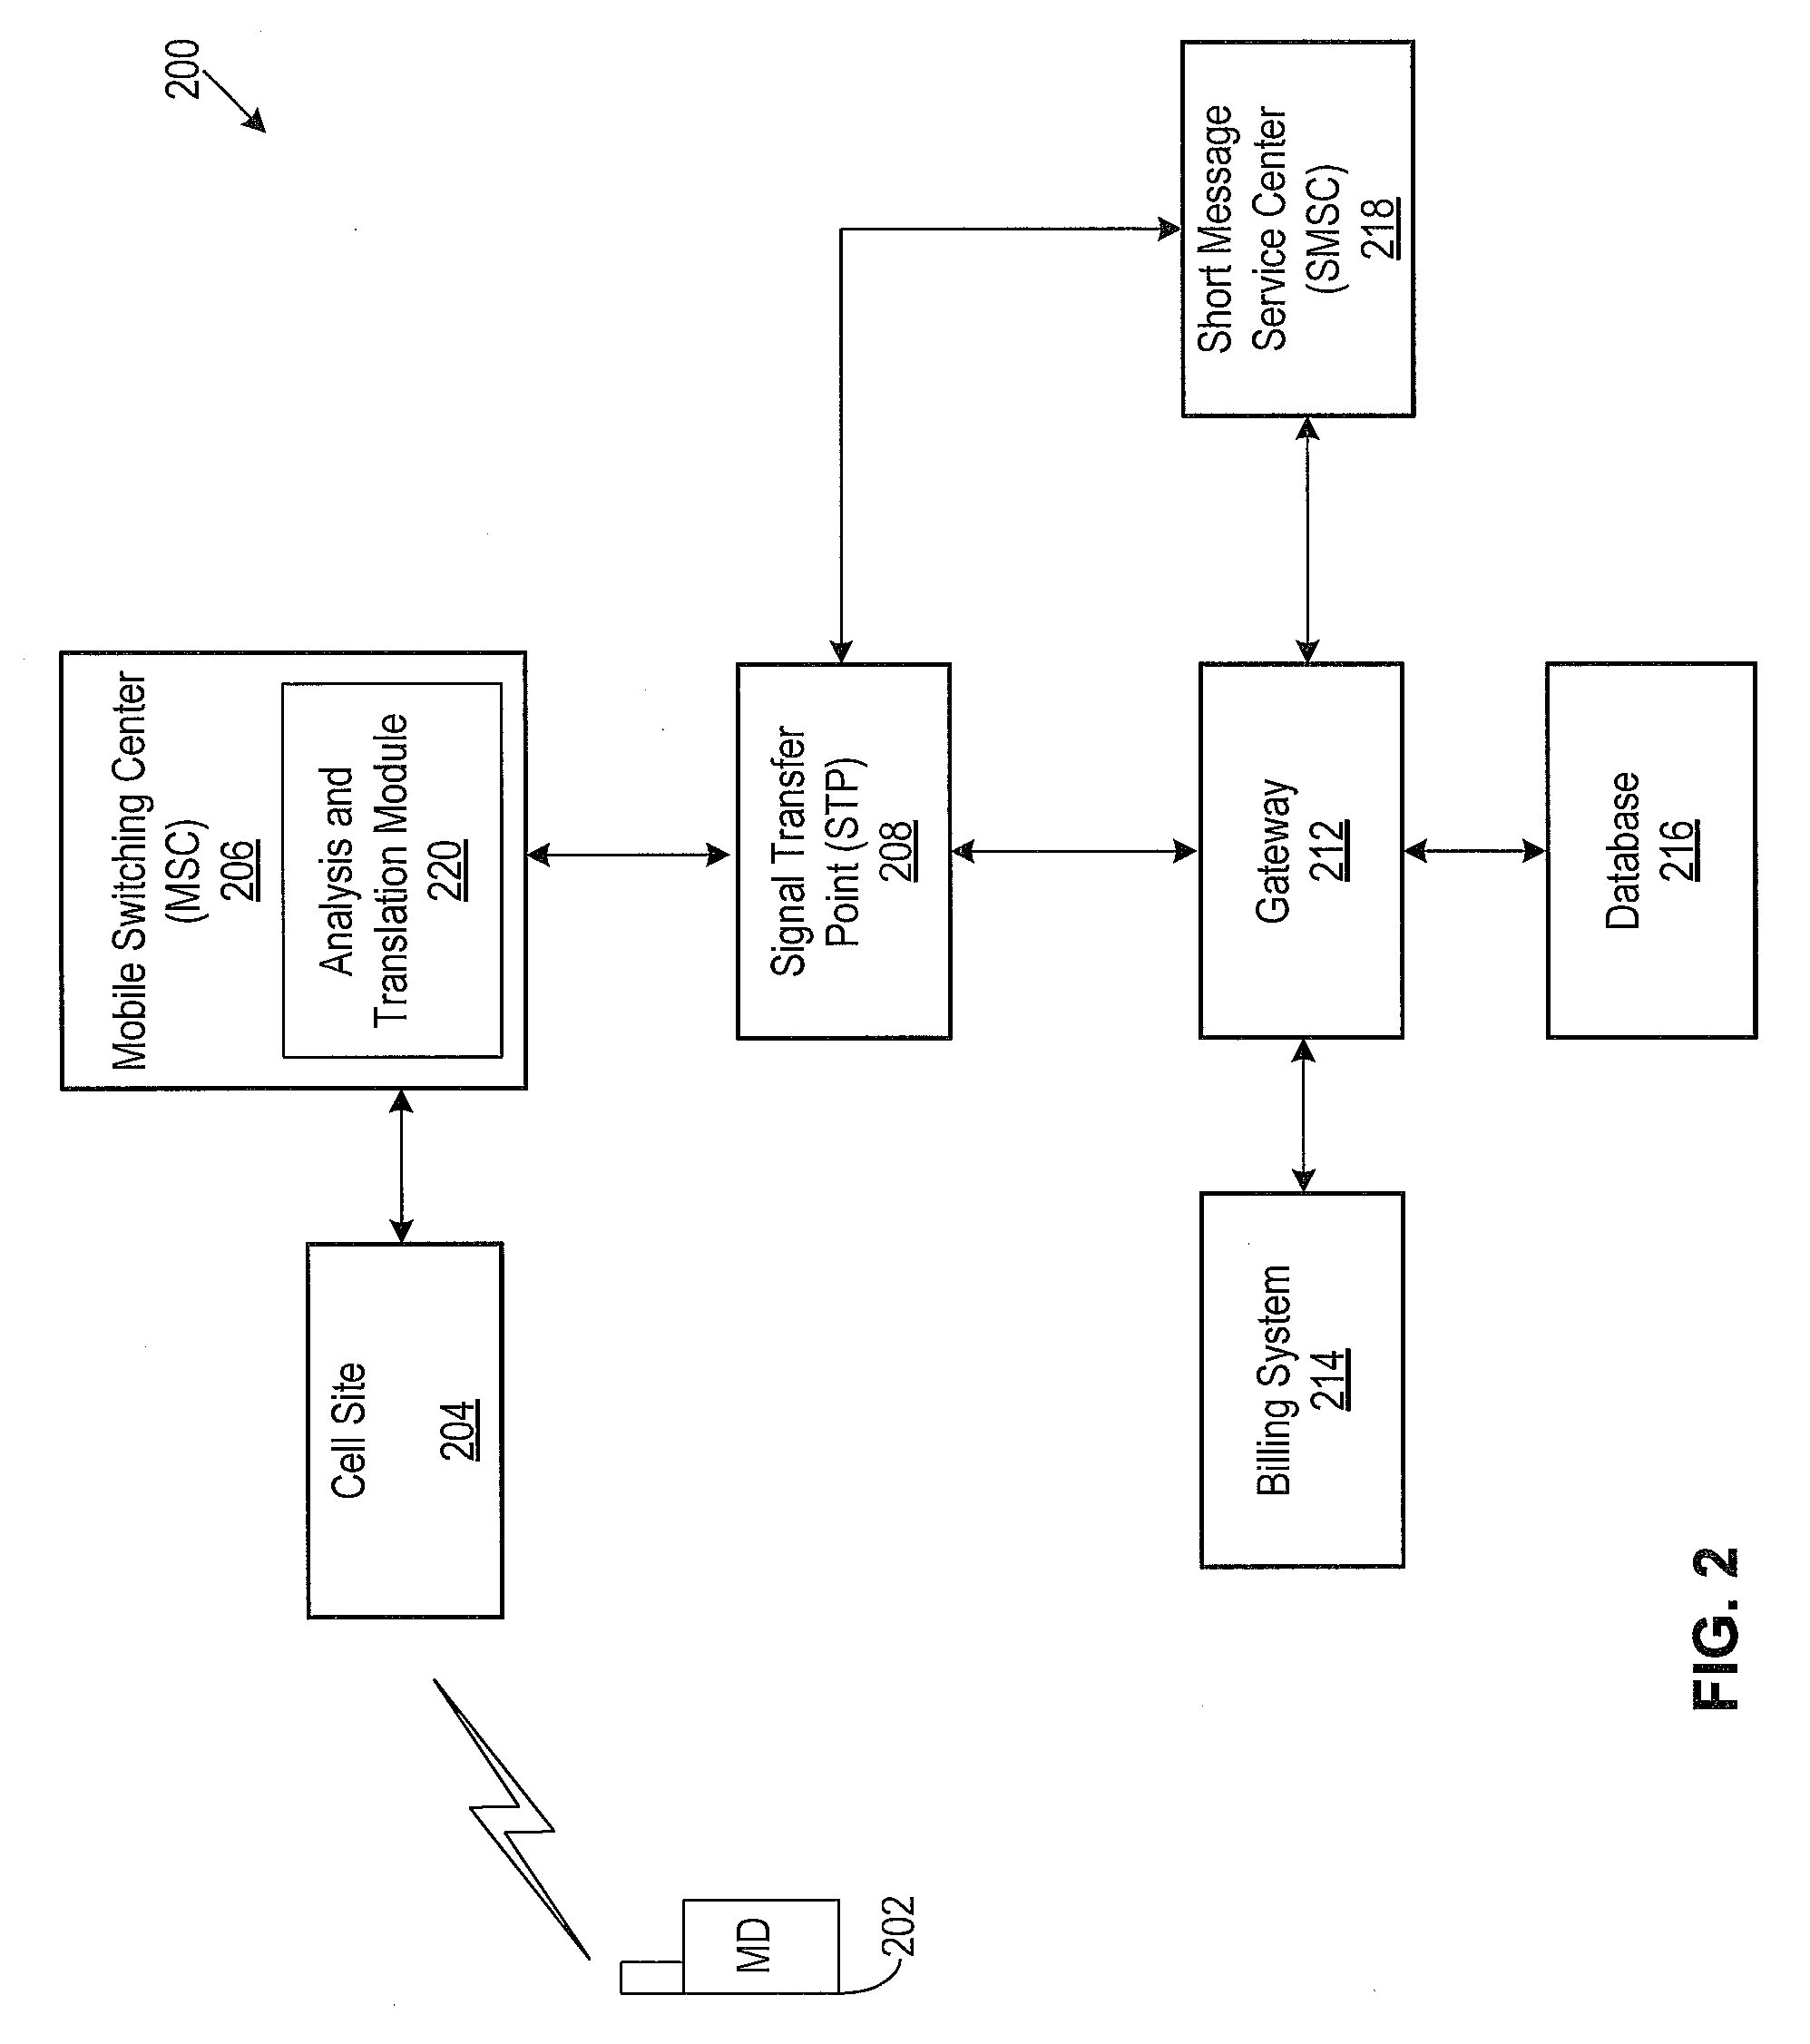 System and method for providing airtime overdraft protection